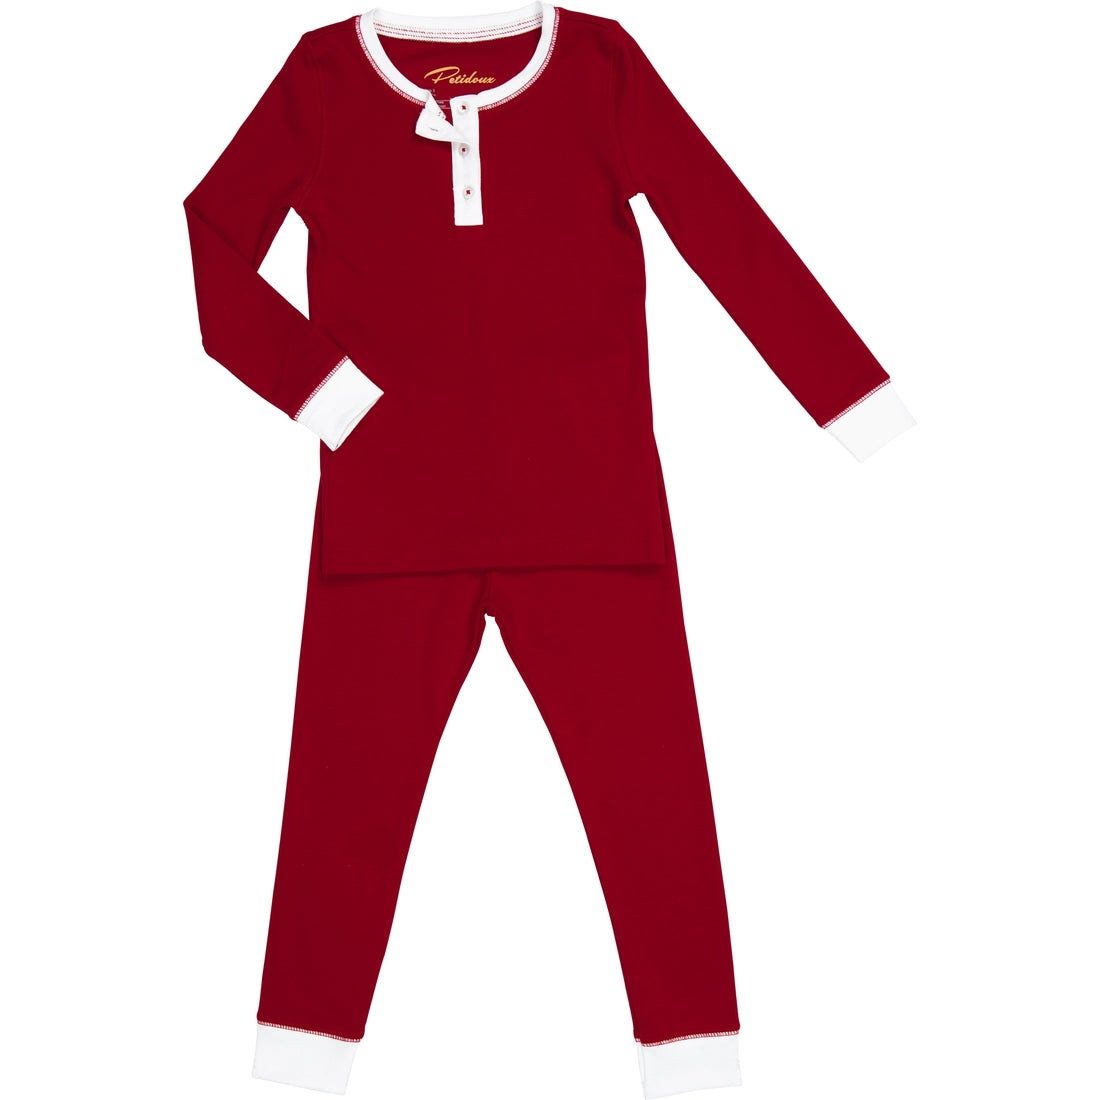 Organic Cotton Pajamas in Solid Red